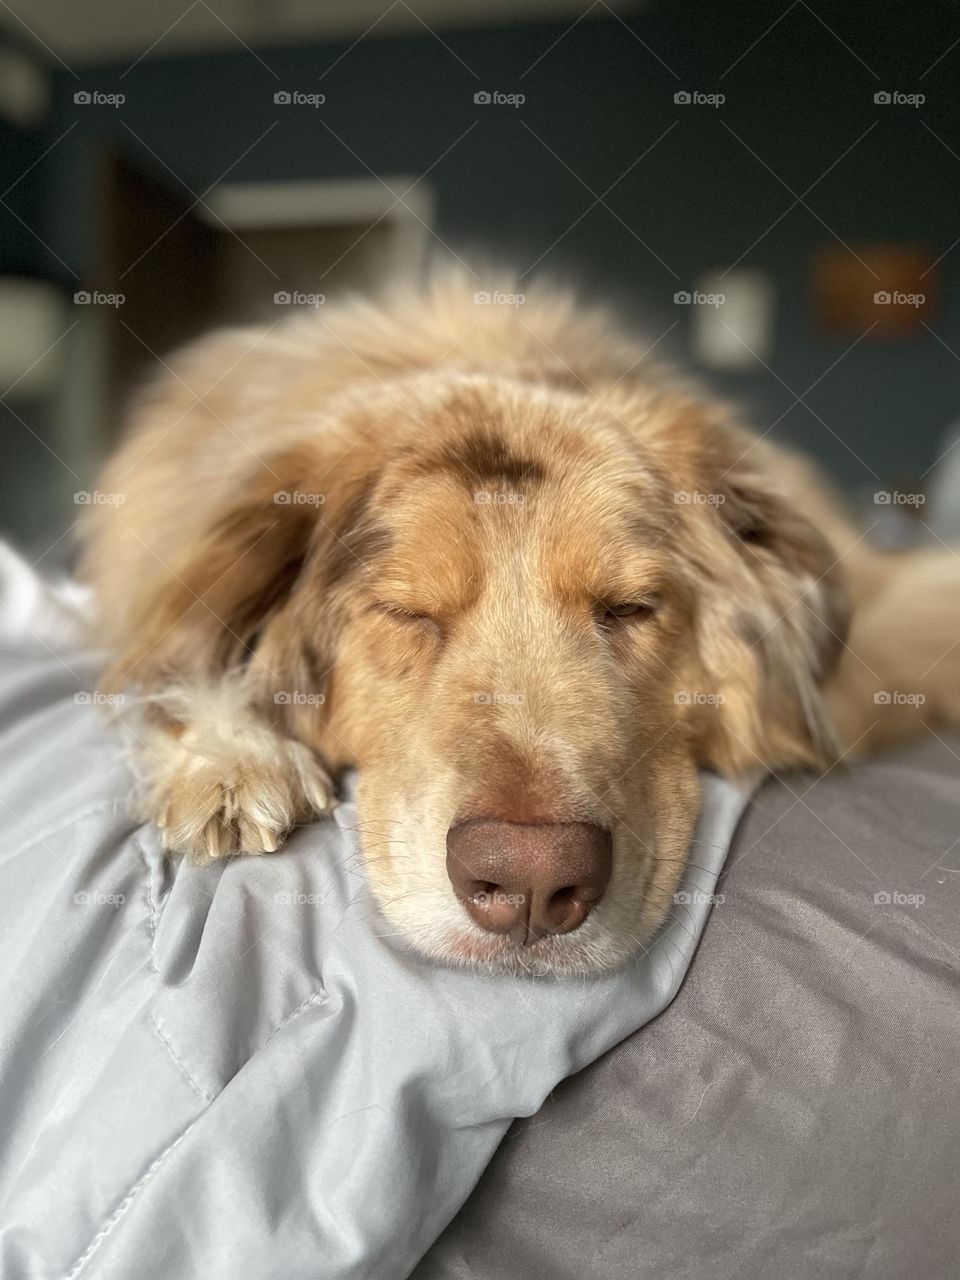 Sleepy pup resting his head on the bed.